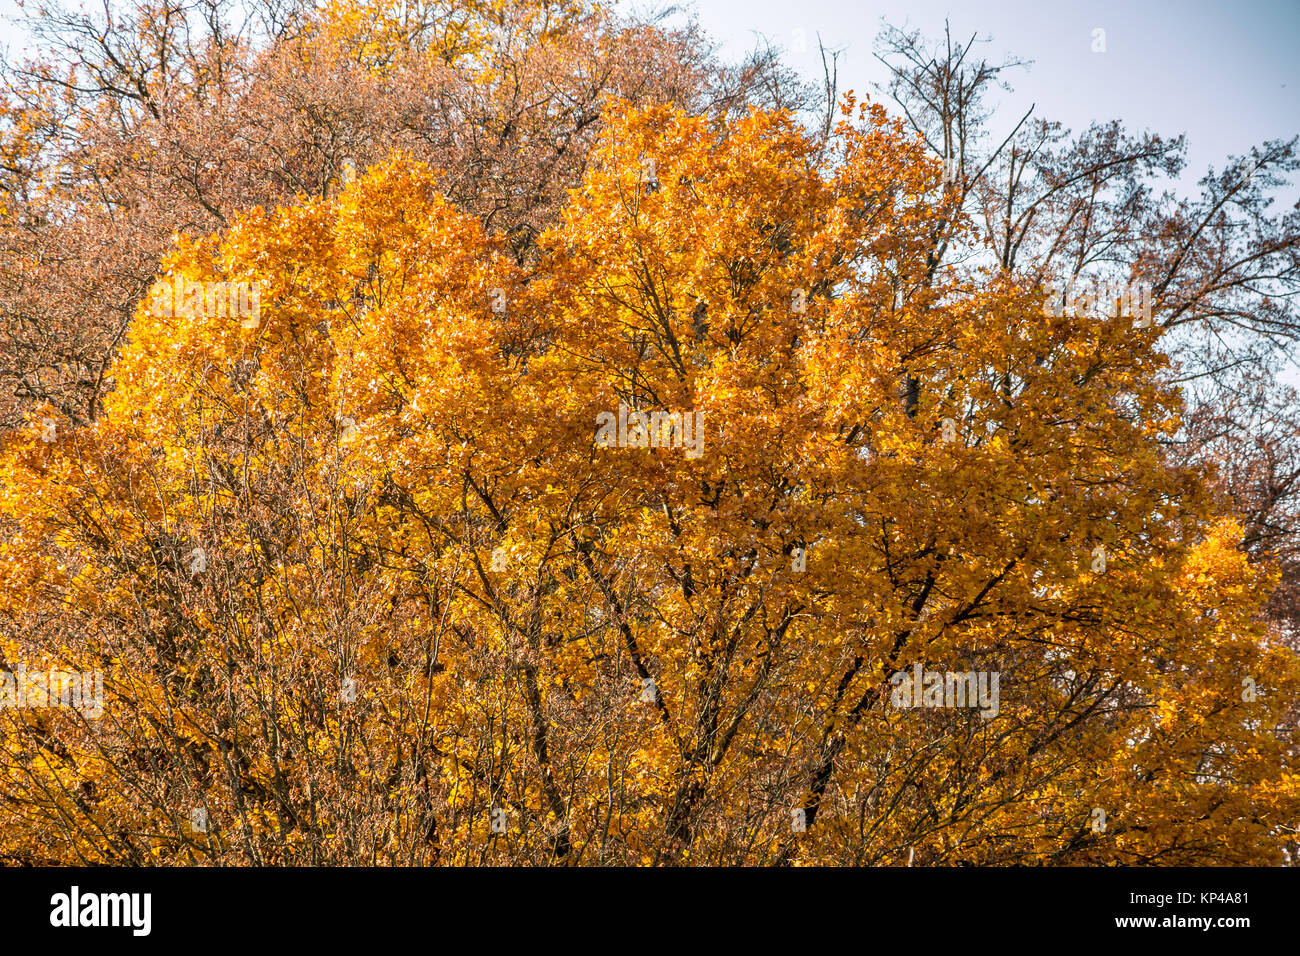 Yellow autumn leaves on the trees of the forest Stock Photo